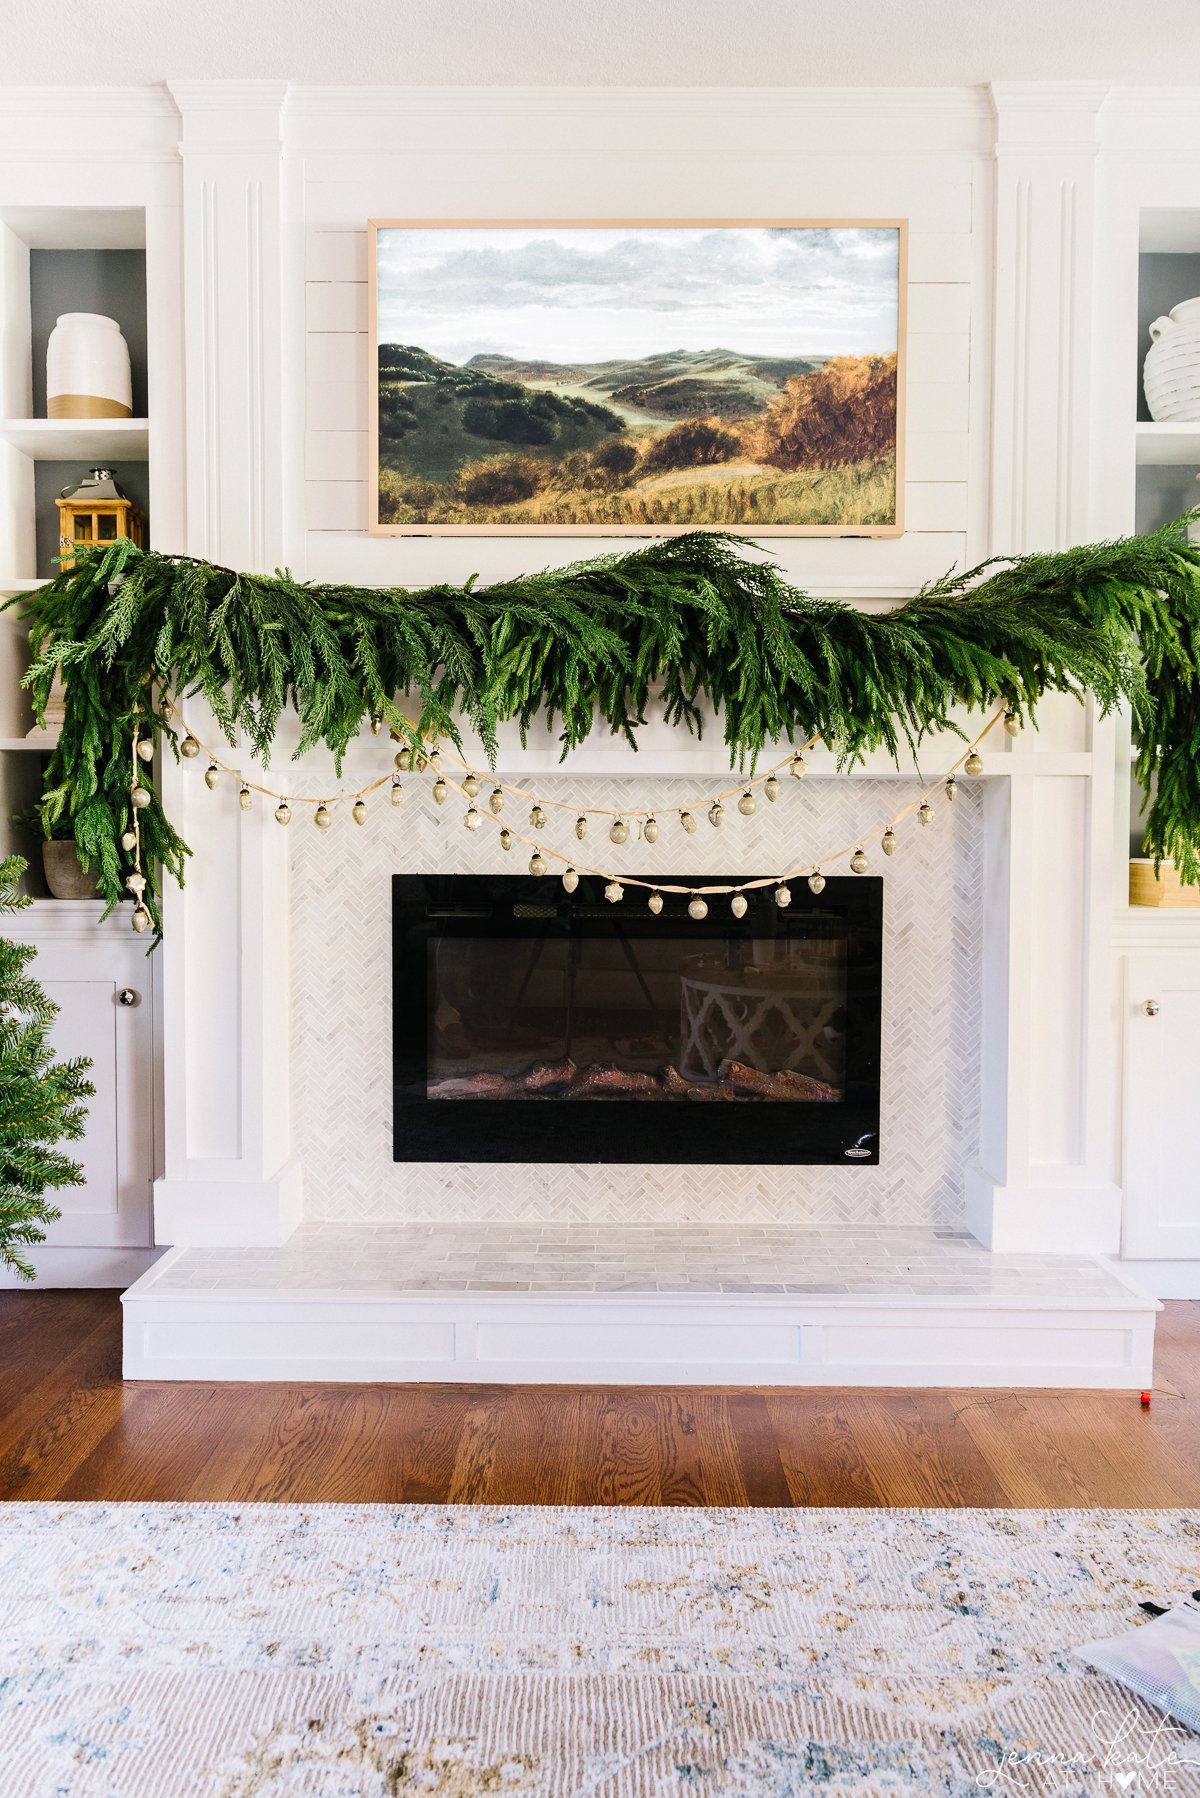 faux garland hung on the mantel with a ornament garland below